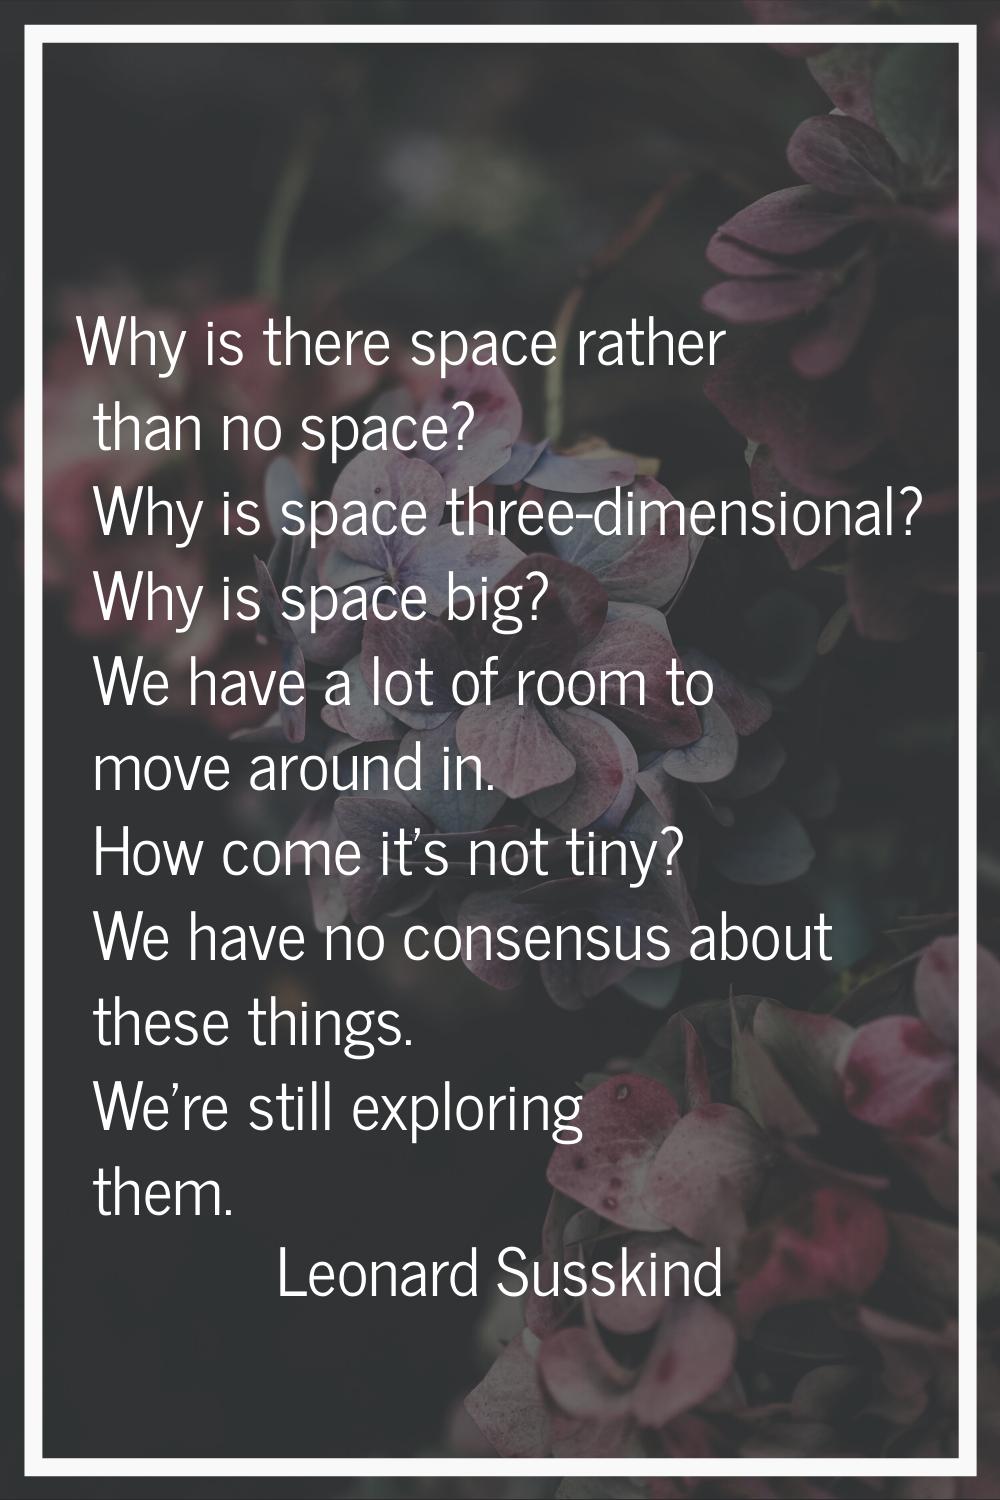 Why is there space rather than no space? Why is space three-dimensional? Why is space big? We have 